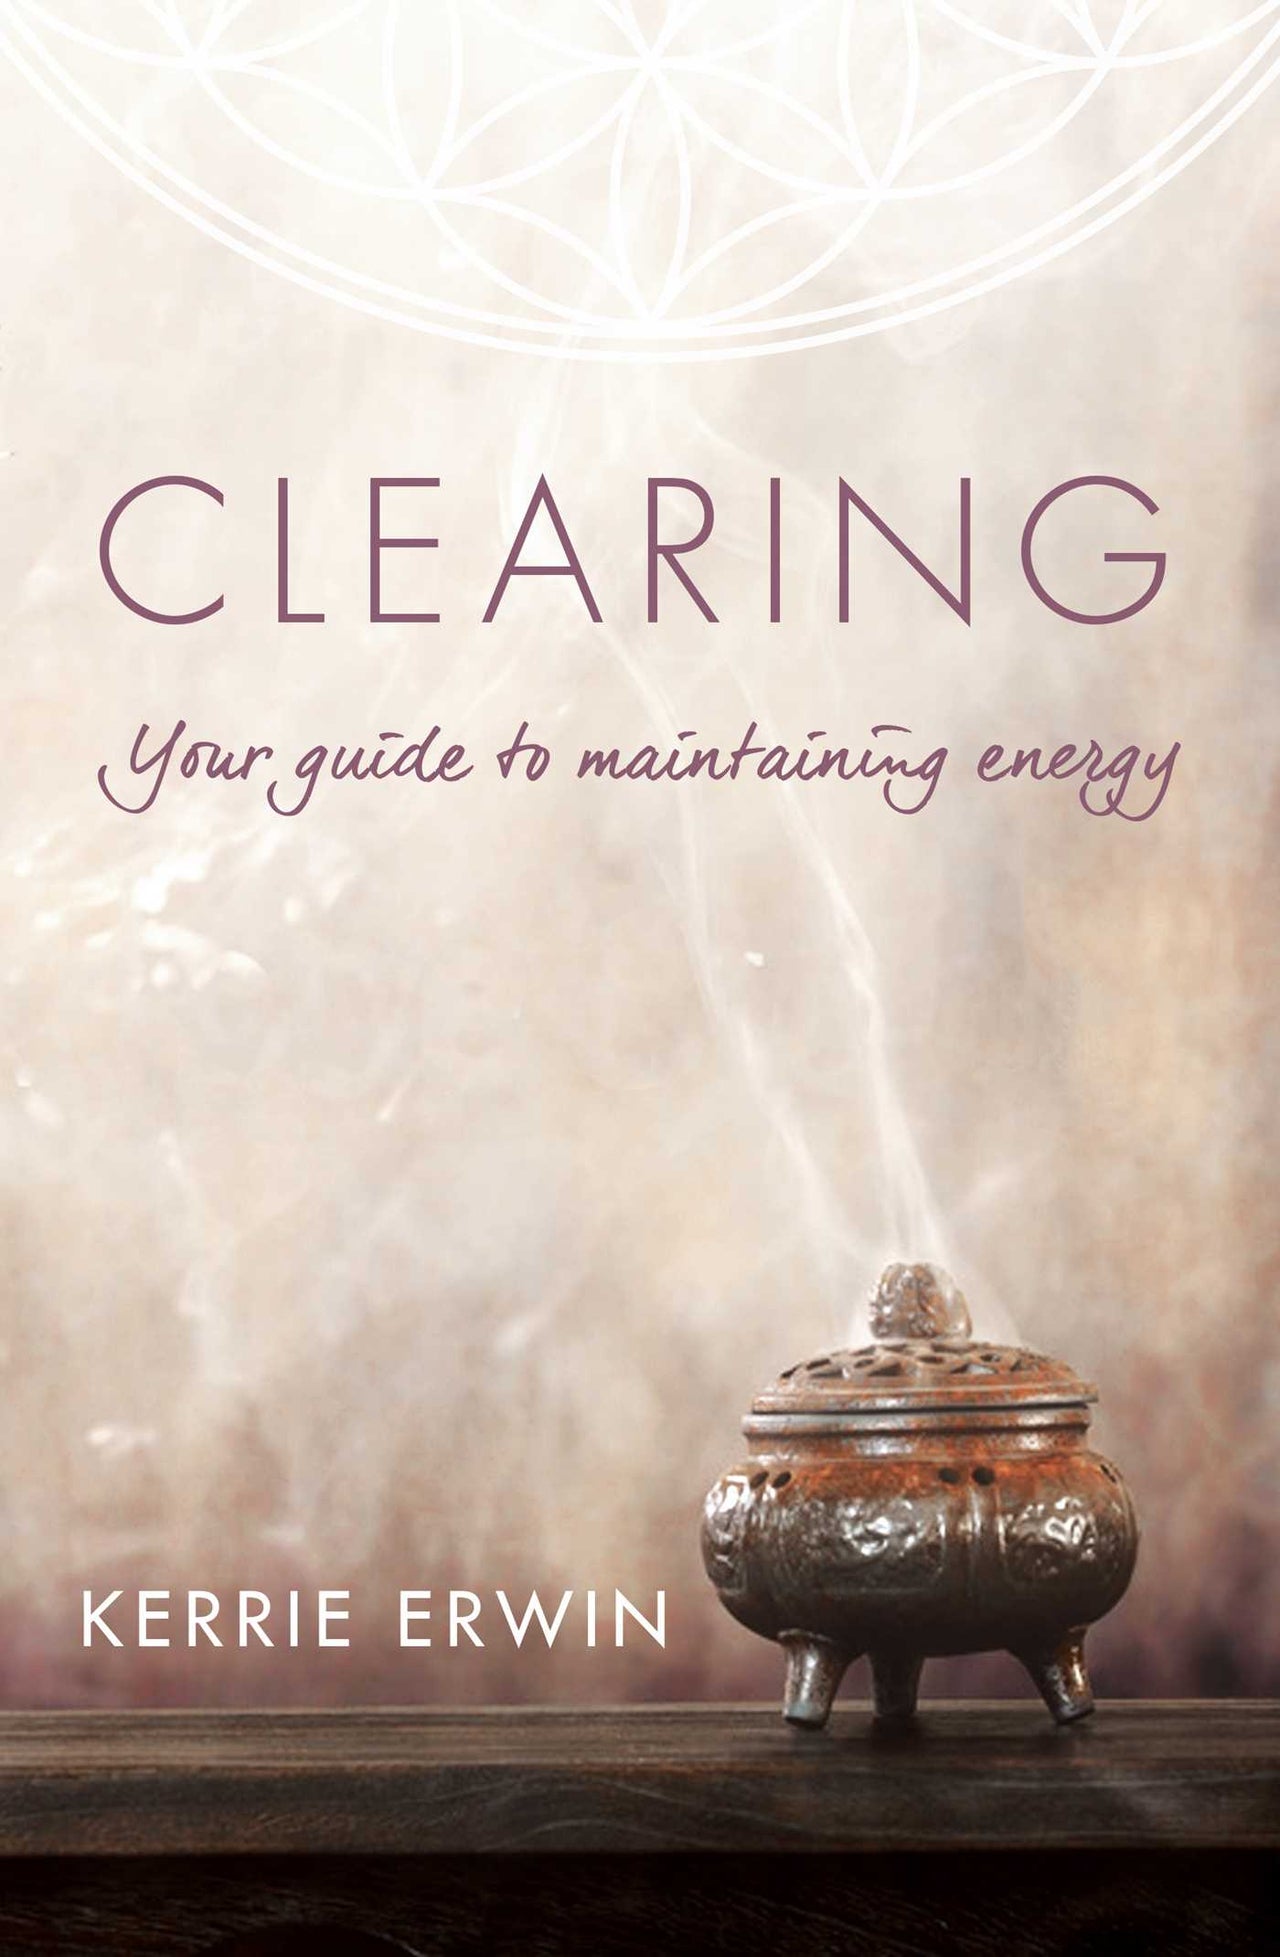 Clearing: Your guide to maintaining energy - Kerrie Erwin